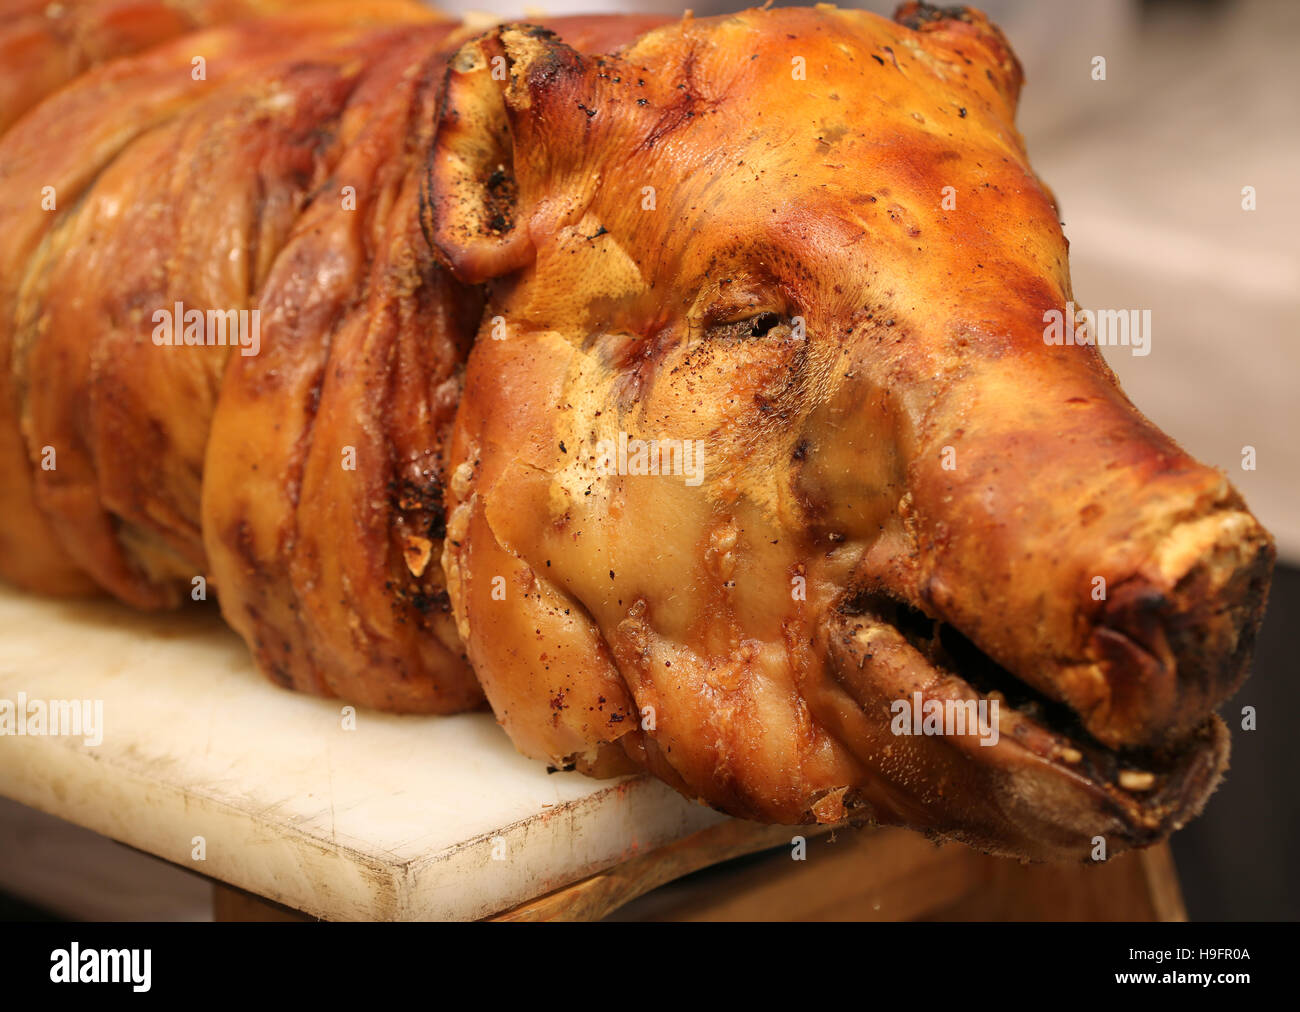 Portrait of the roasted pig on a spit in the butcher Stock Photo